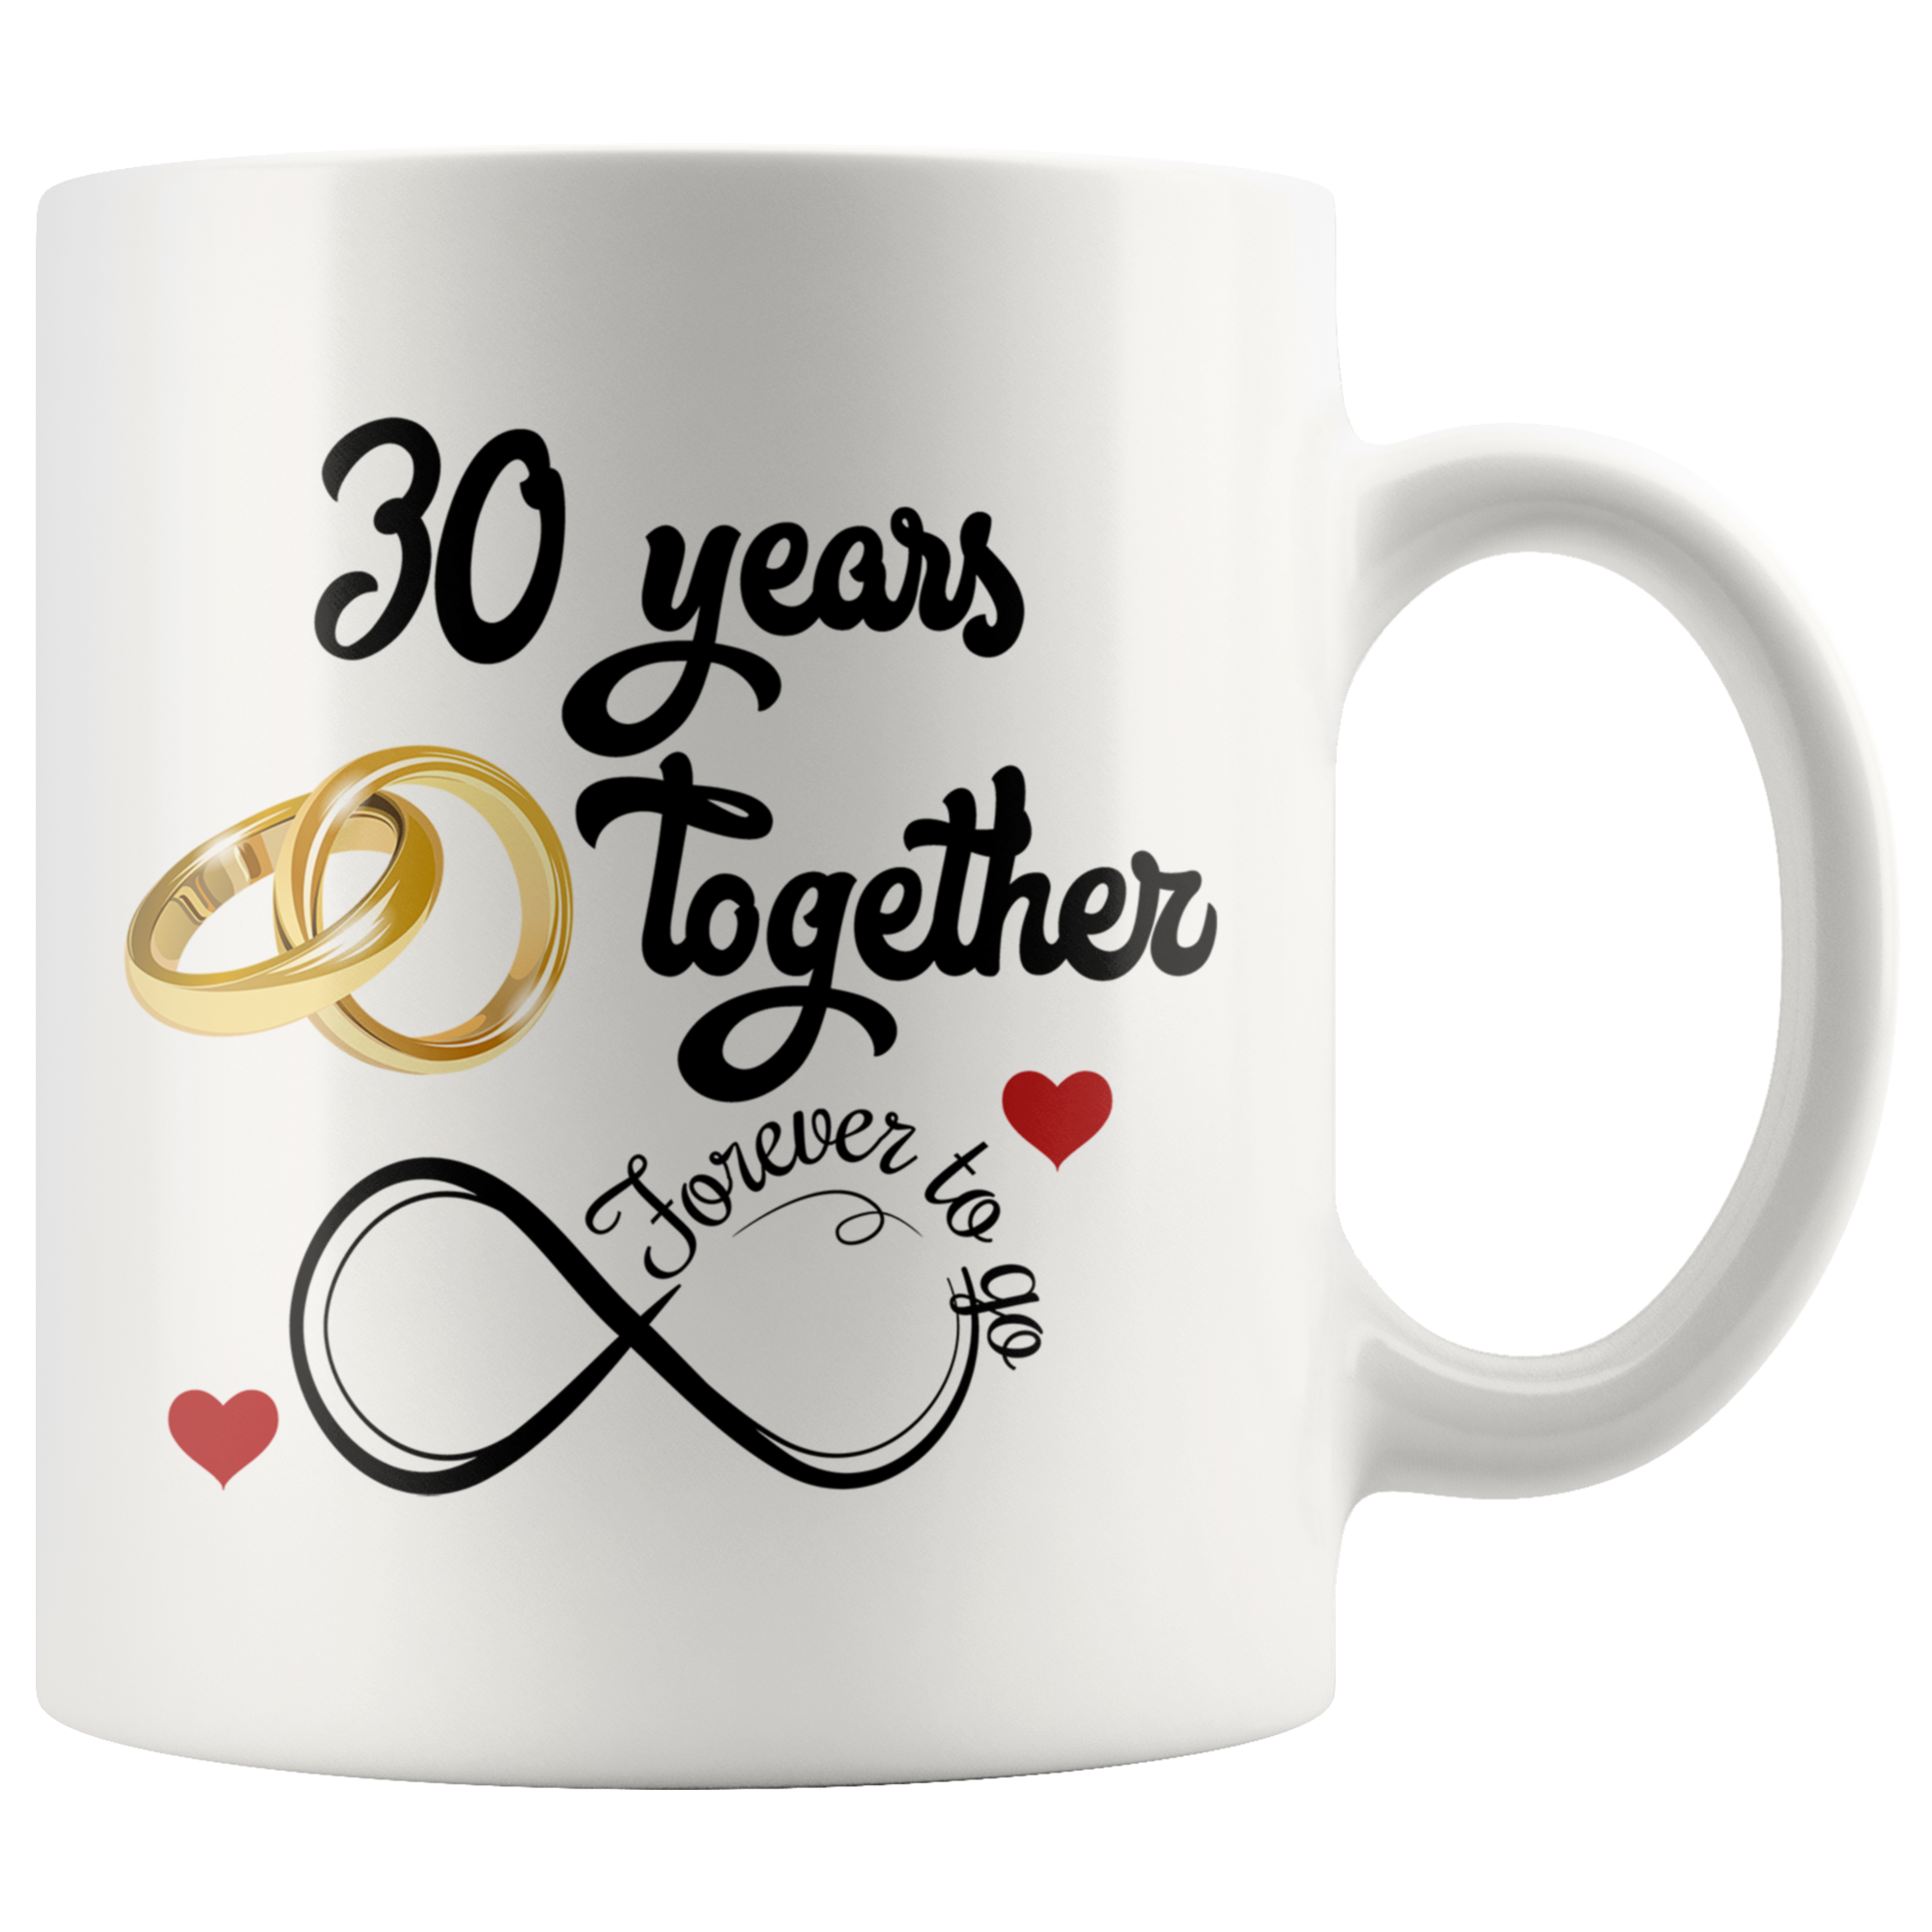 30 Year Wedding Anniversary Gift : 30 Year Wedding Anniversary Gift for Parents | Zazzle.com : Modern 30th anniversary presents for men.